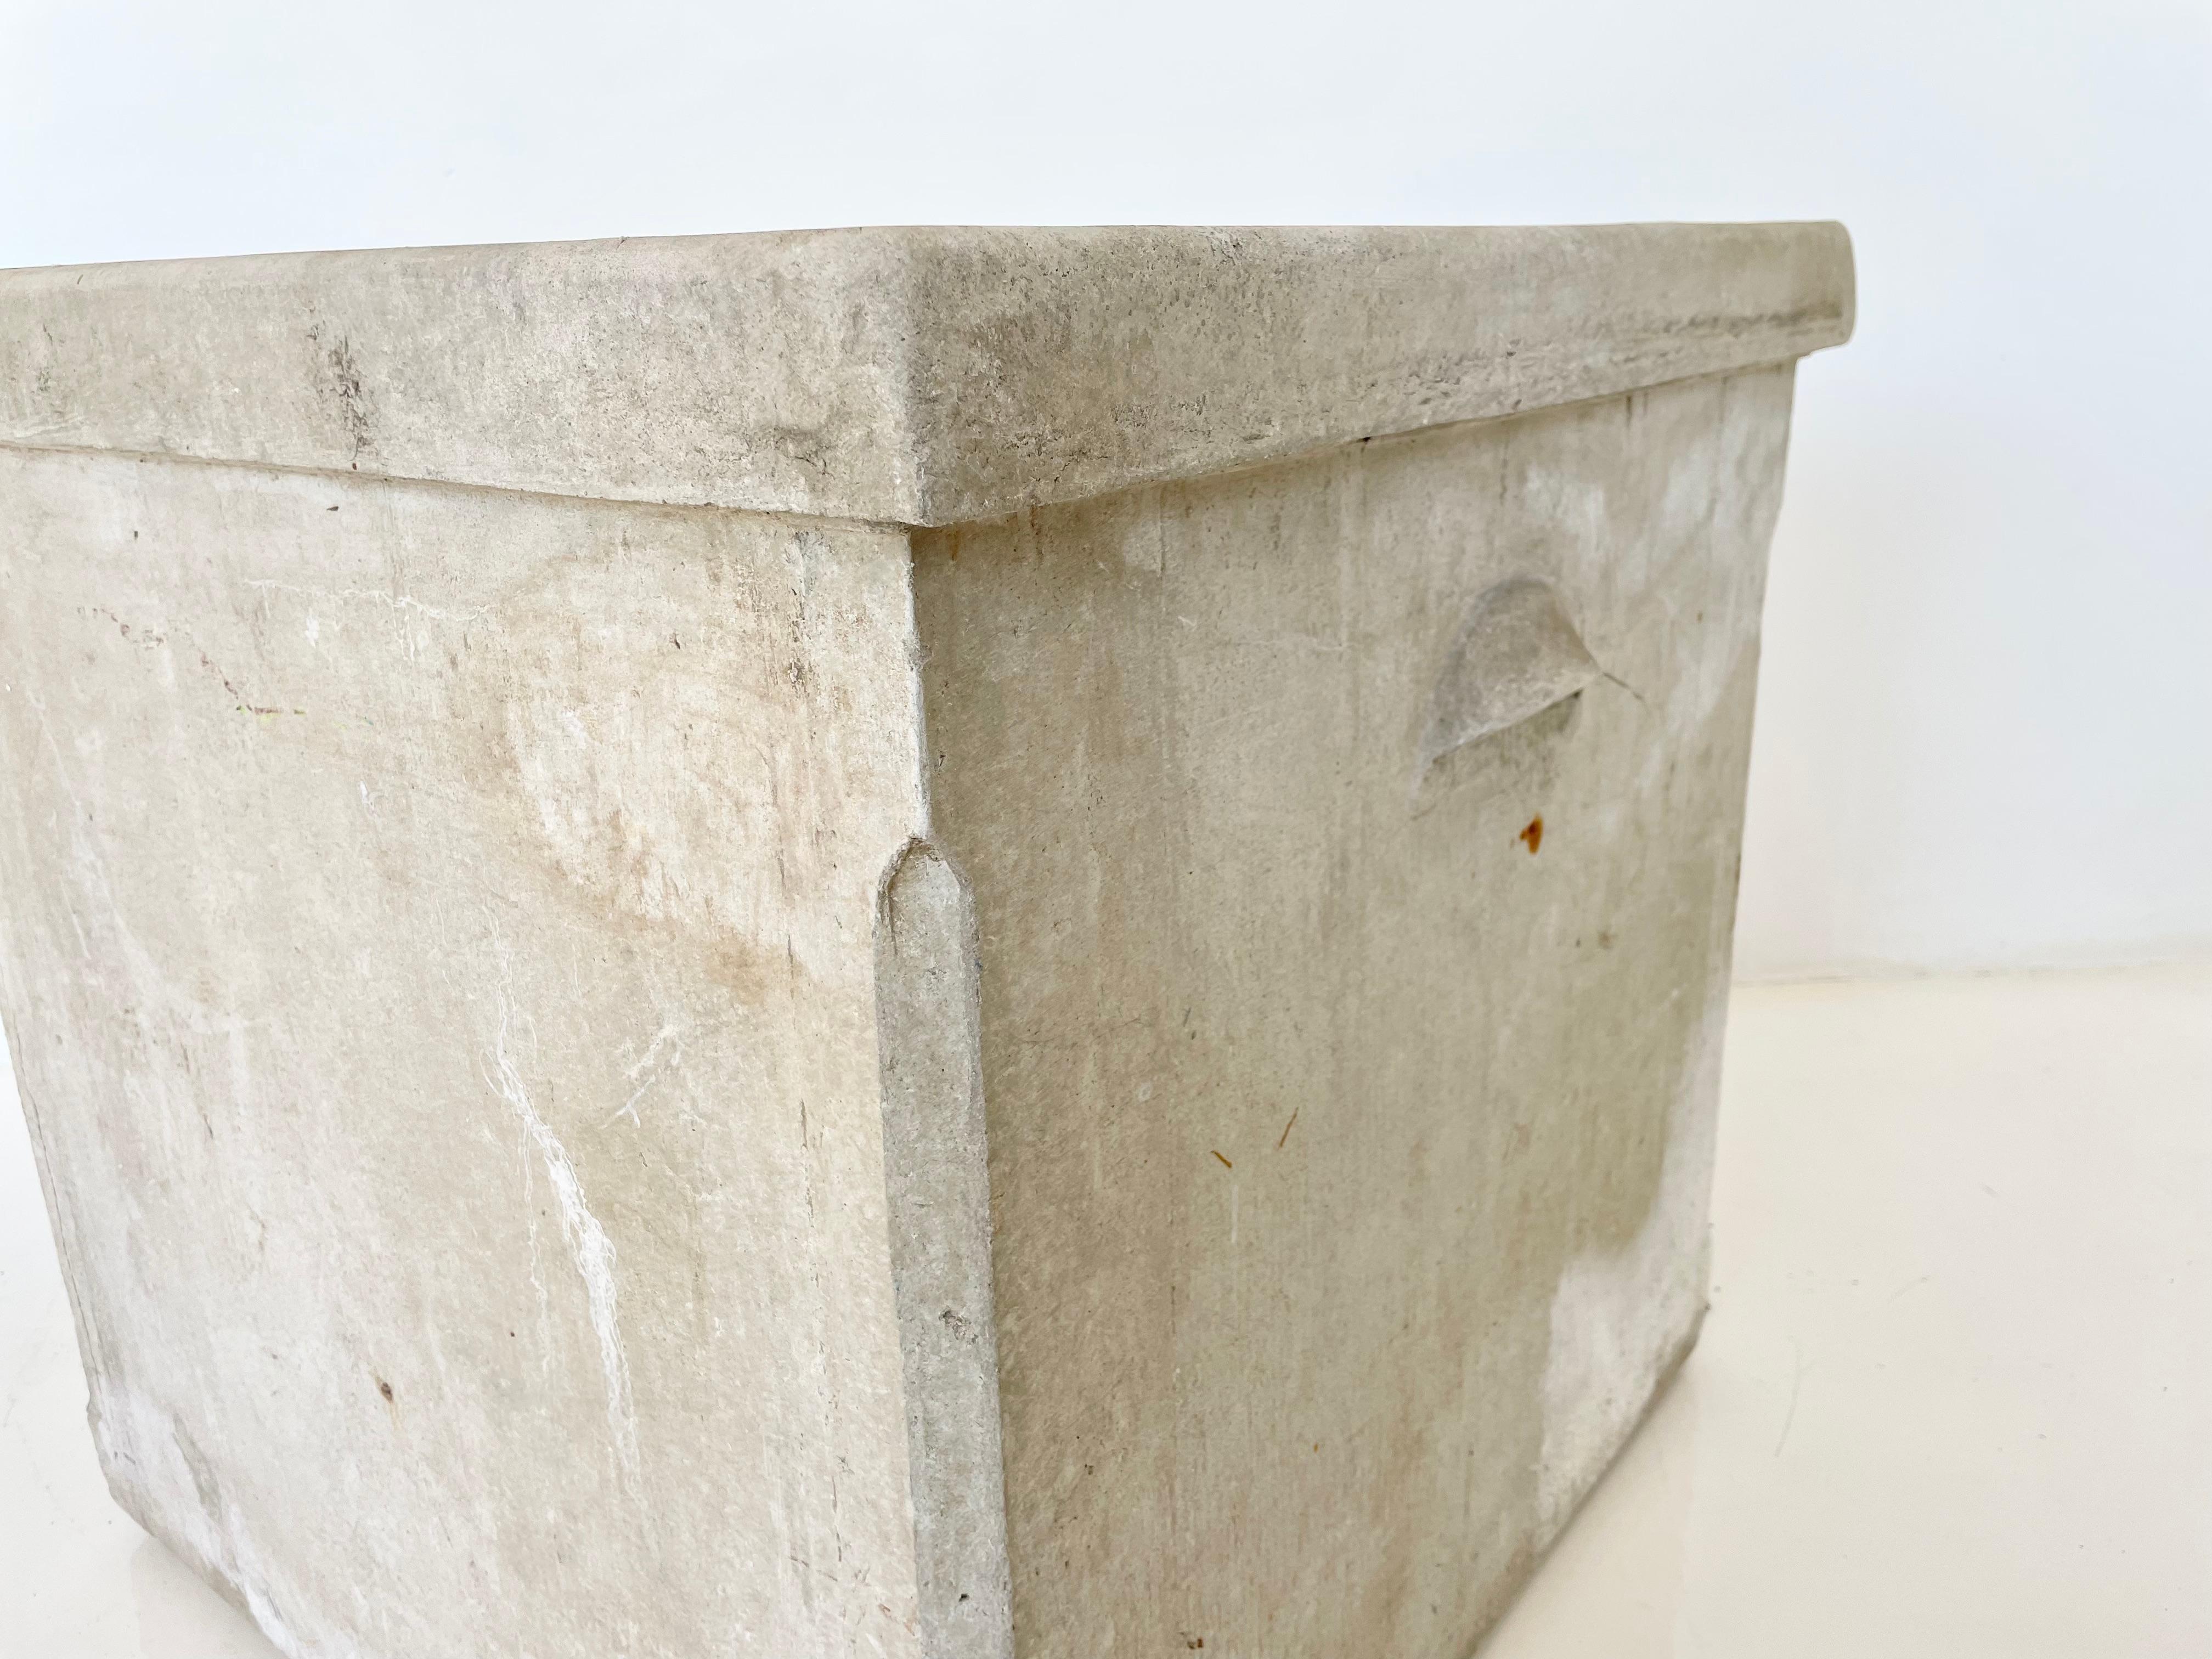 Willy Guhl Concrete Box with Lid, 1960s Switzerland For Sale 4